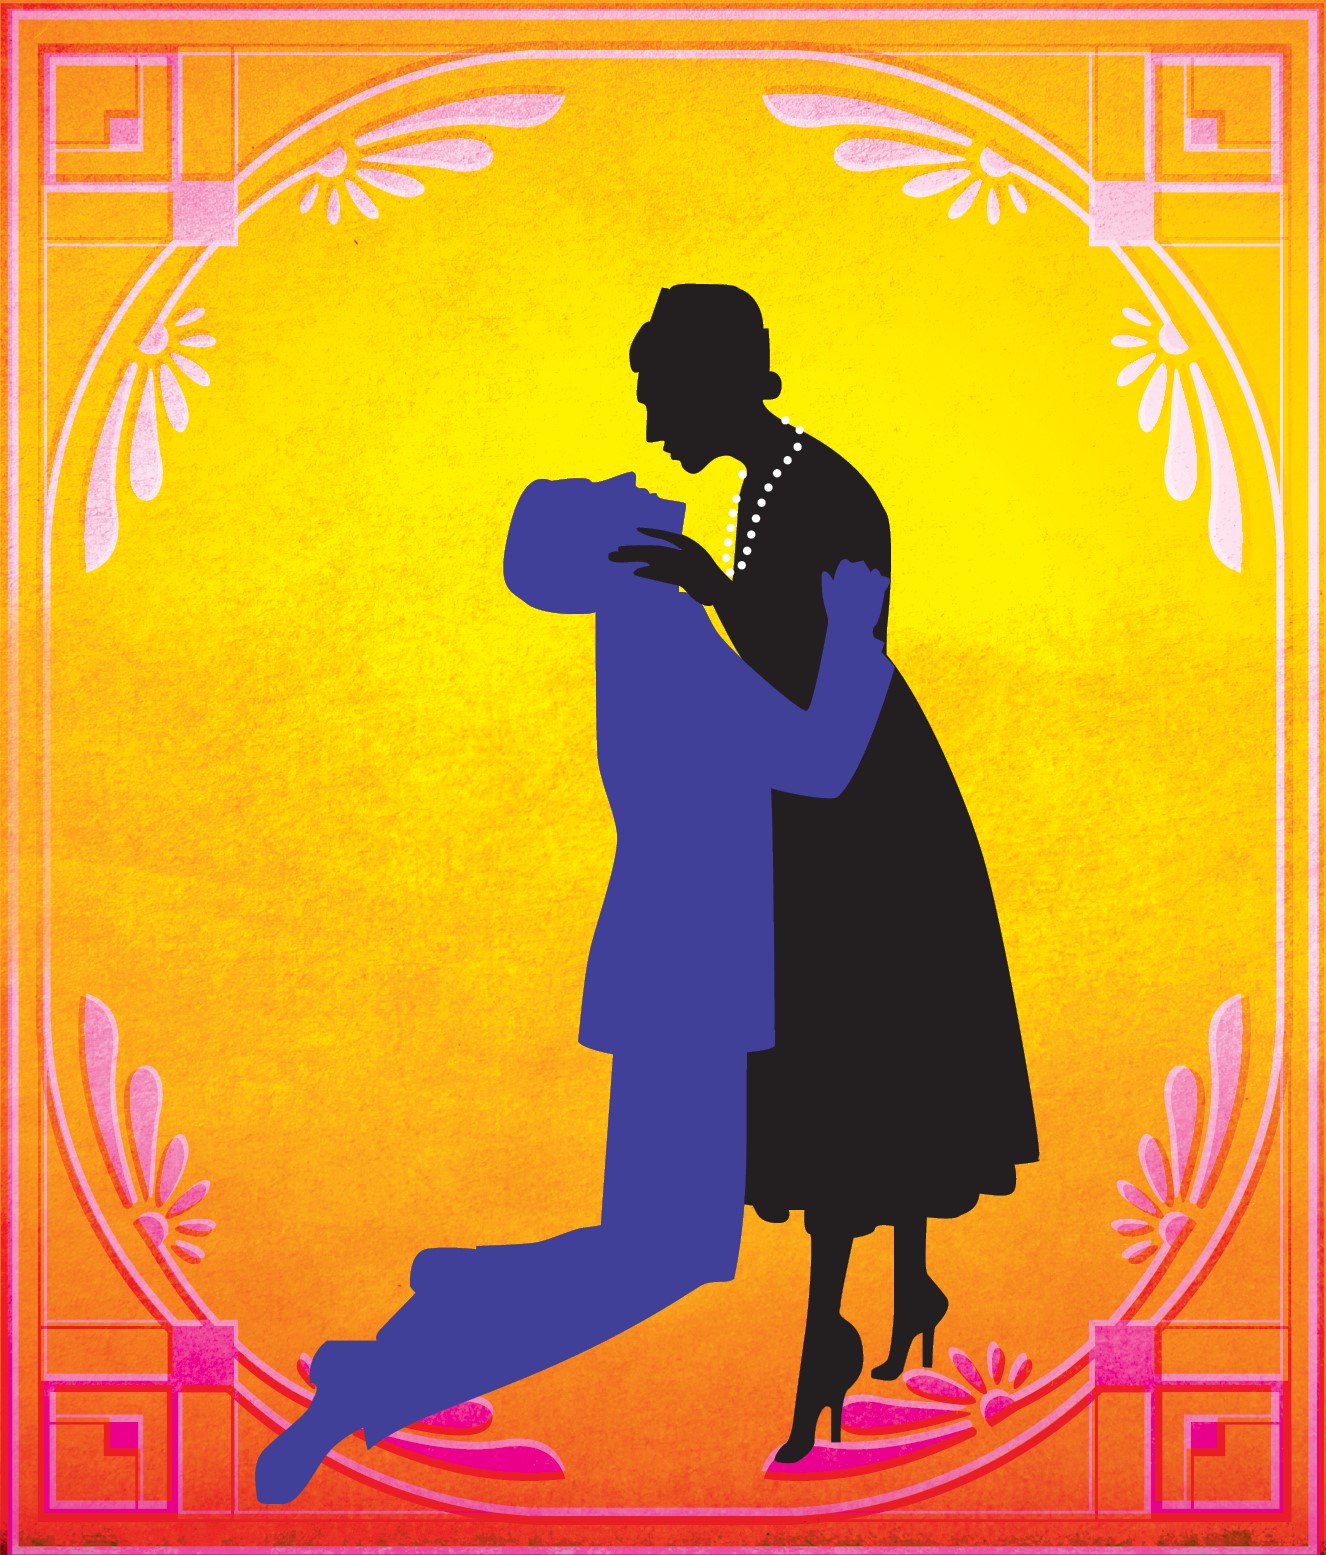 Embraced silhouettes within an art deco frame: a man dangling from, and looking up at a woman, their eyes locked.